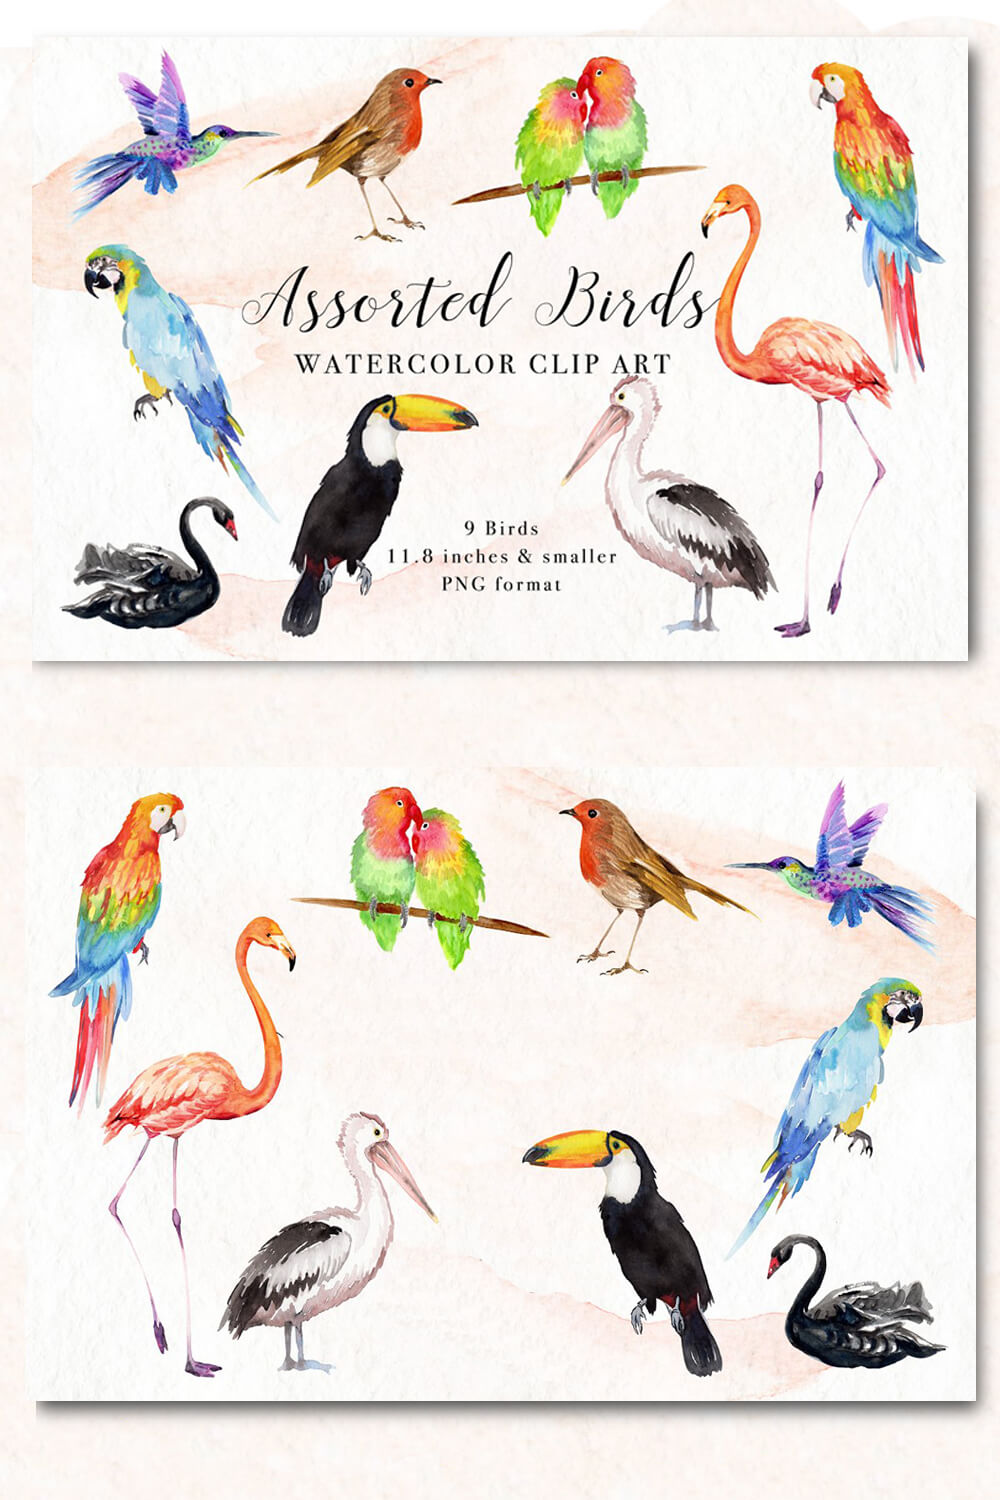 Watercolor images of exotic birds.